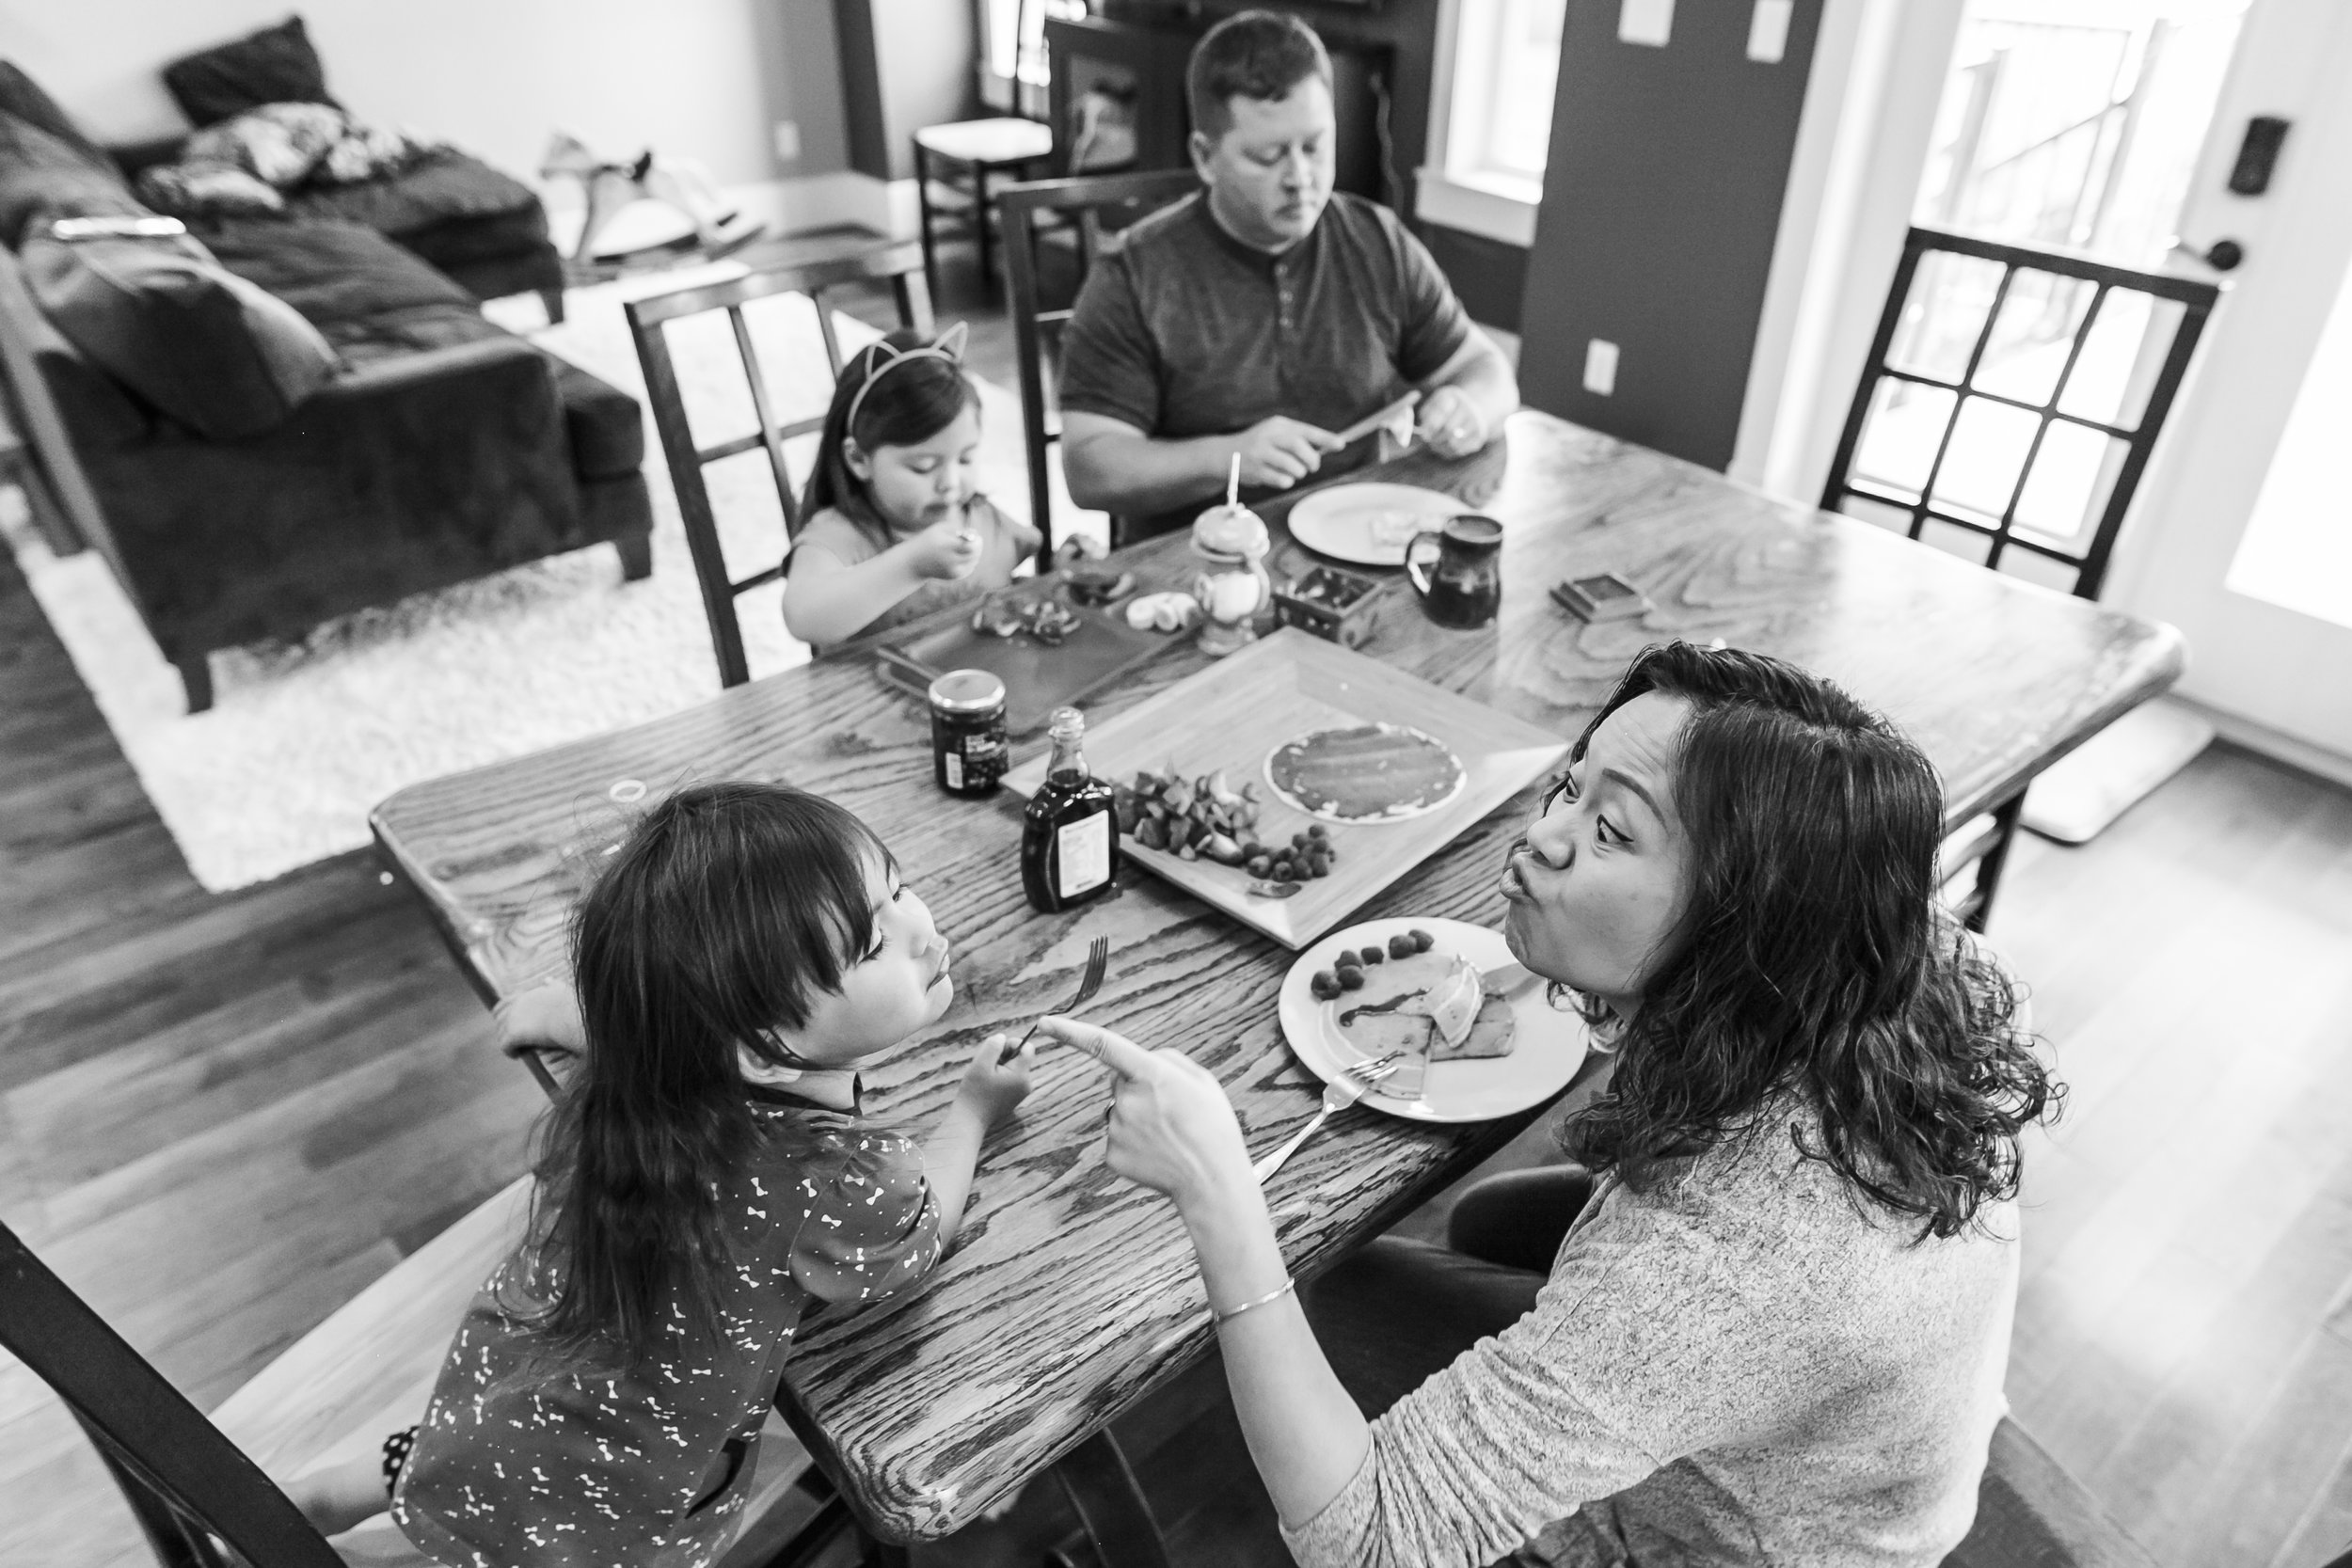 Surrey Family photographer. Vancouver family photographer, klutch Photography, documentary photography, candid photography, parents getting breakfast